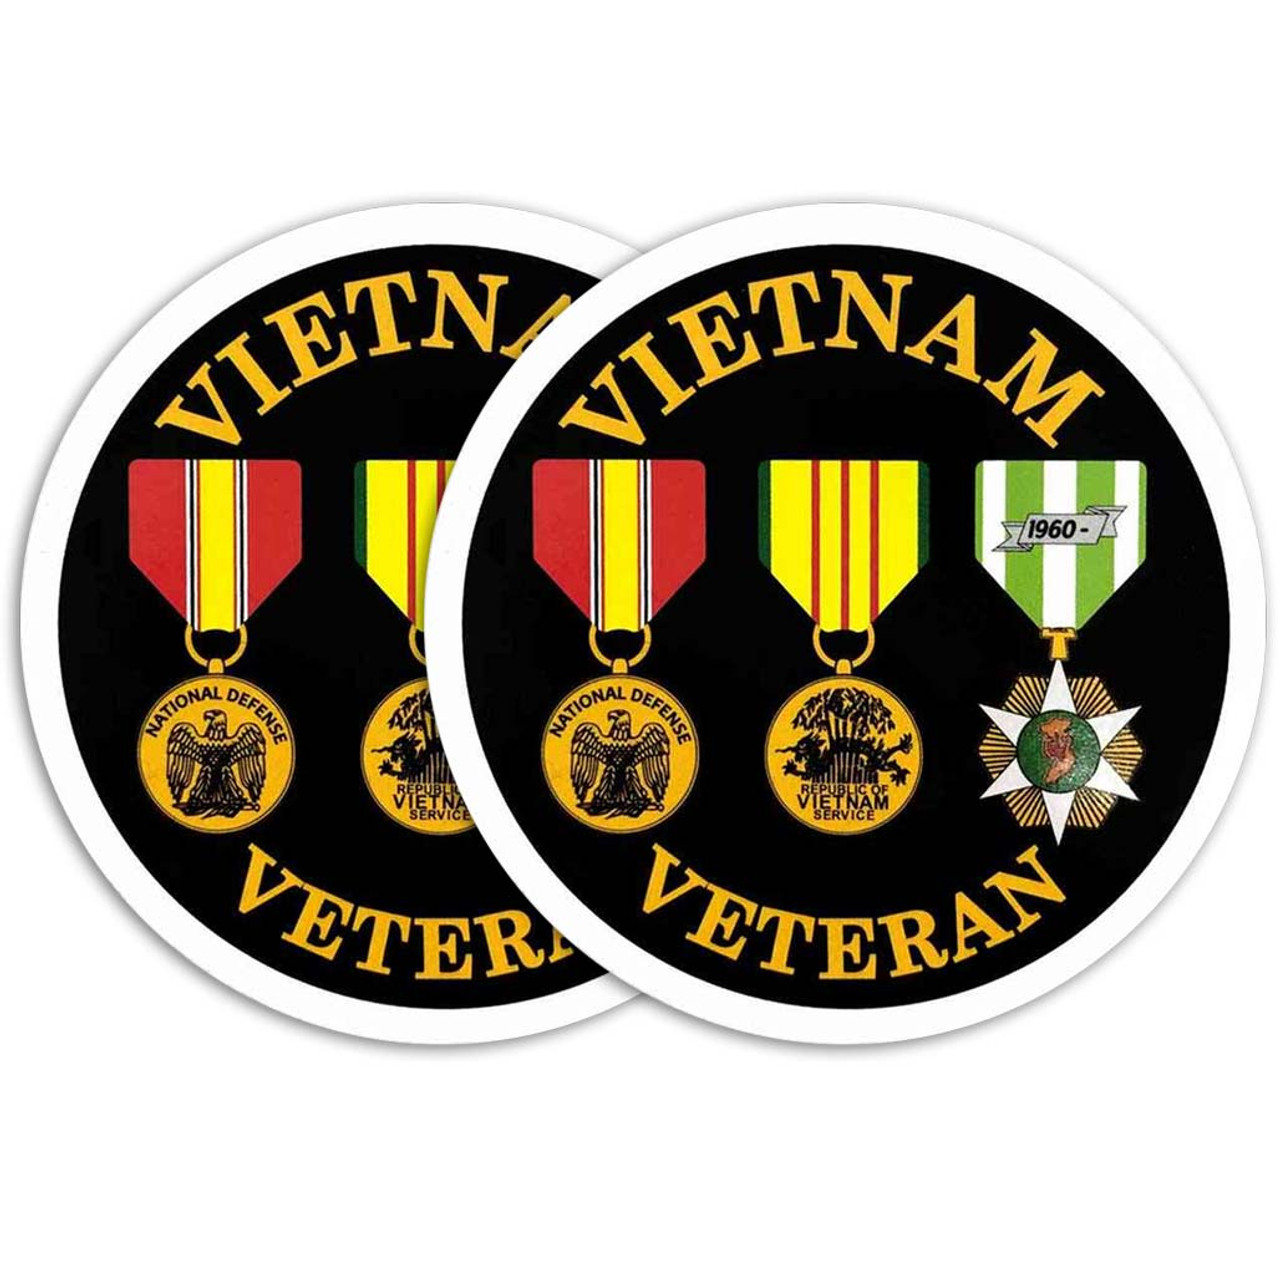 Vietnam Veteran 3 Service Medals Circle Decal Quantity of (2) photo of two decals